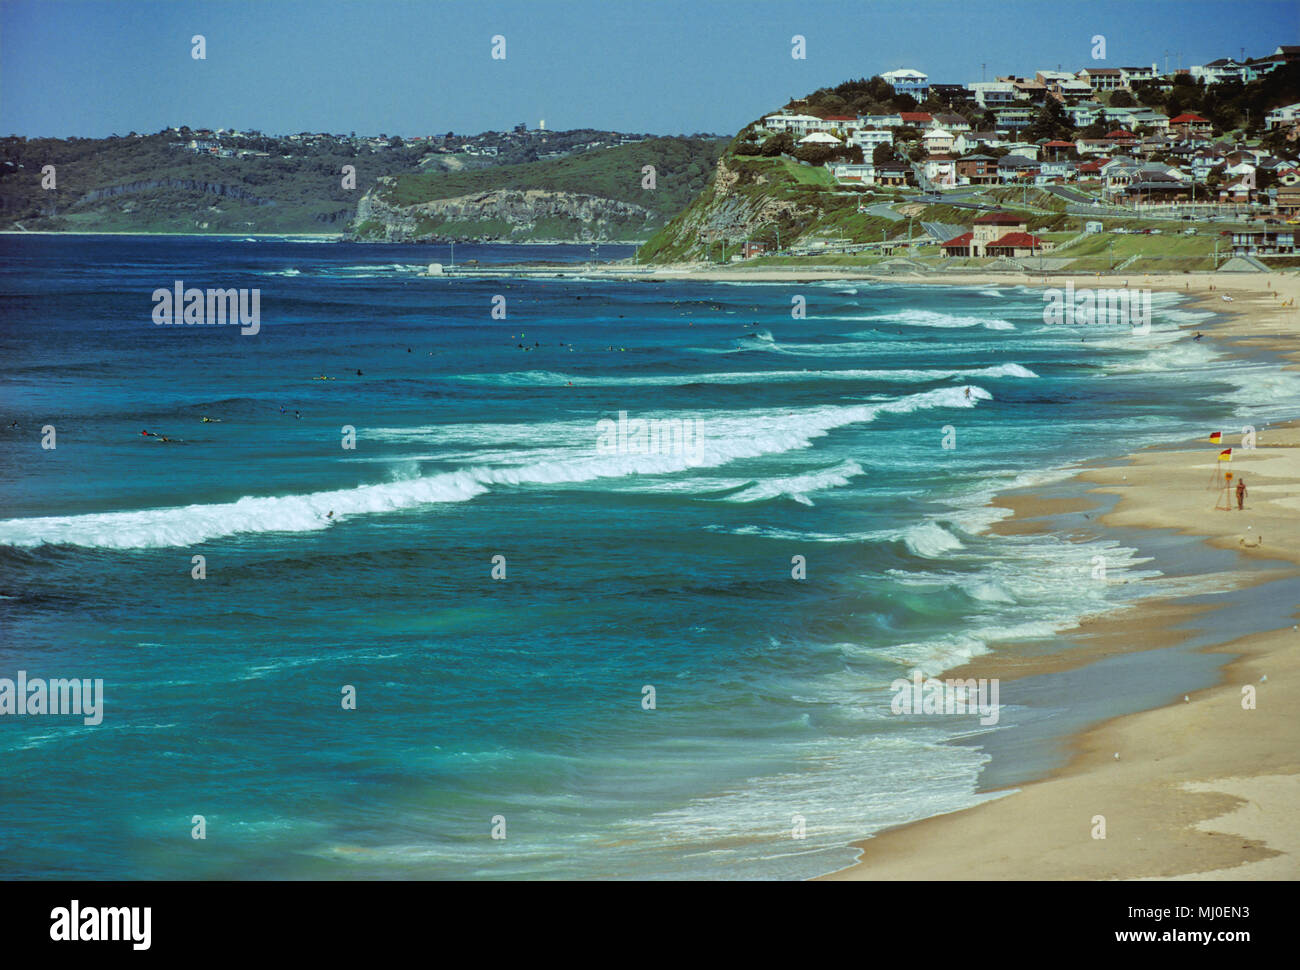 Bar, Dixon and Merewether surfing beaches: Newcastle, Central Coast, NSW, Australia Stock Photo